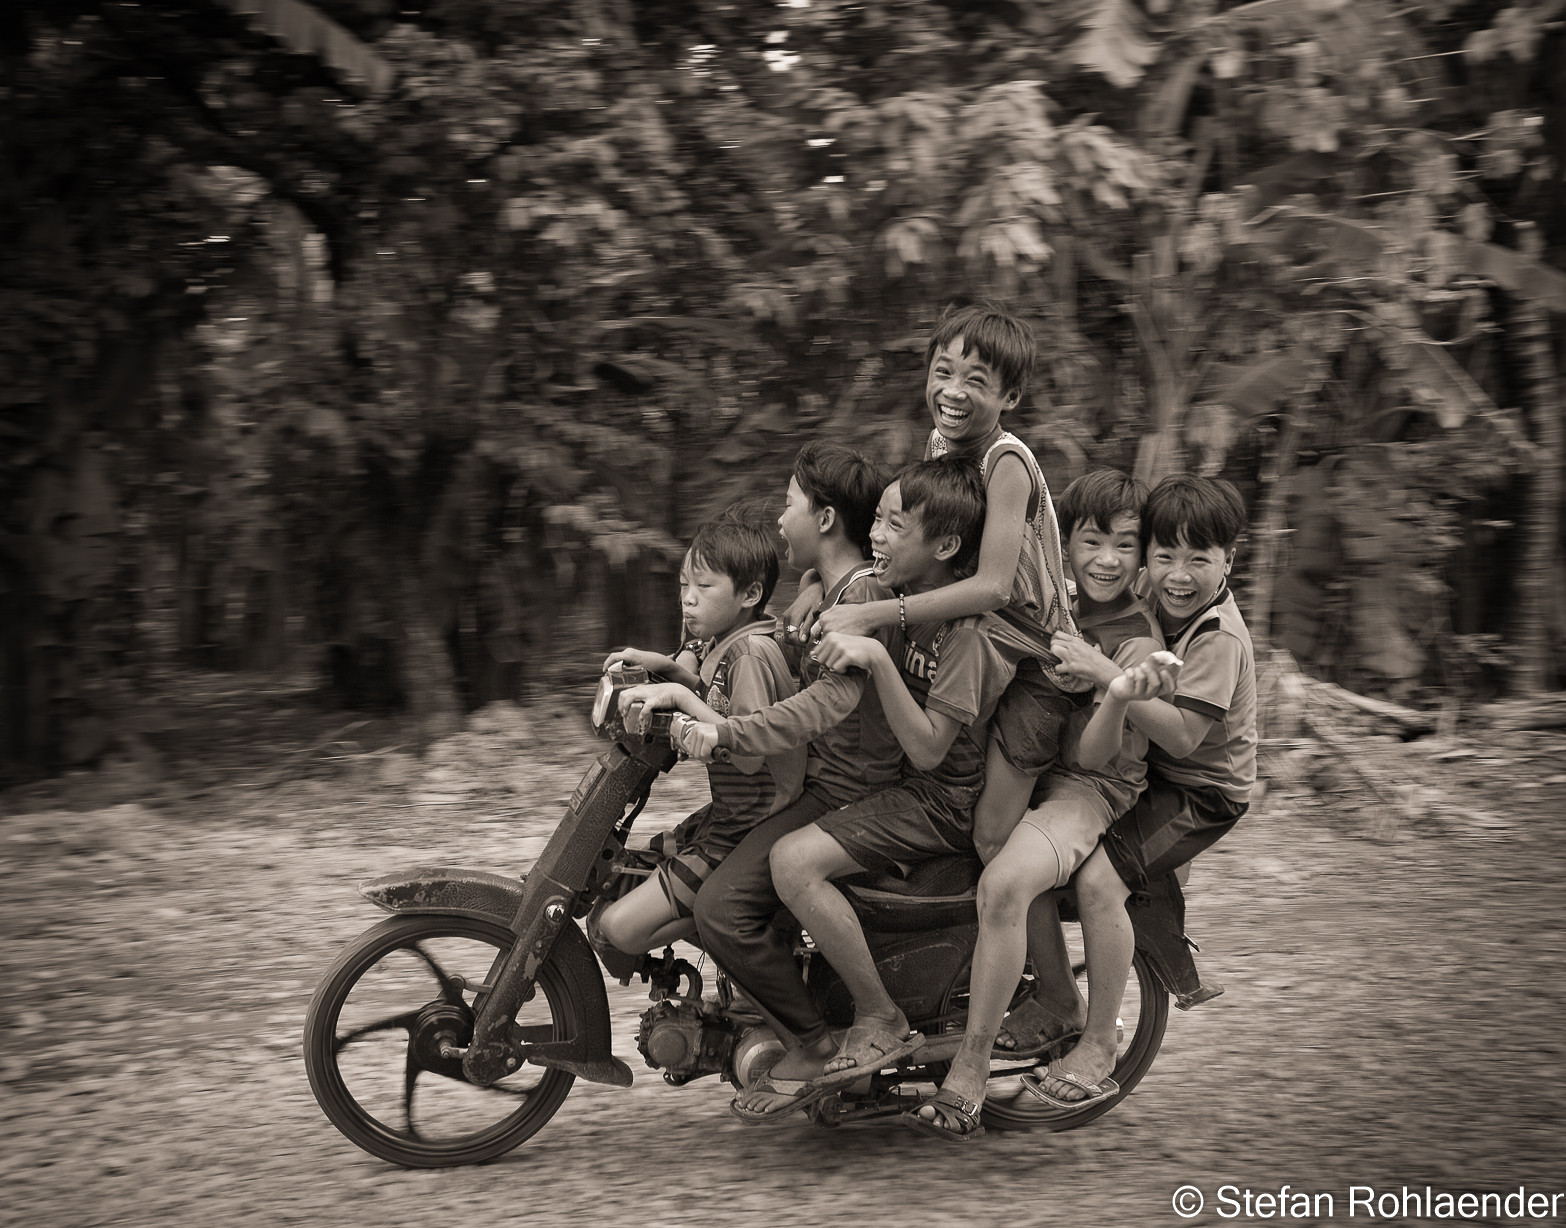 Six boys, one motorbike and a bumpy road - what could possibly go wrong...